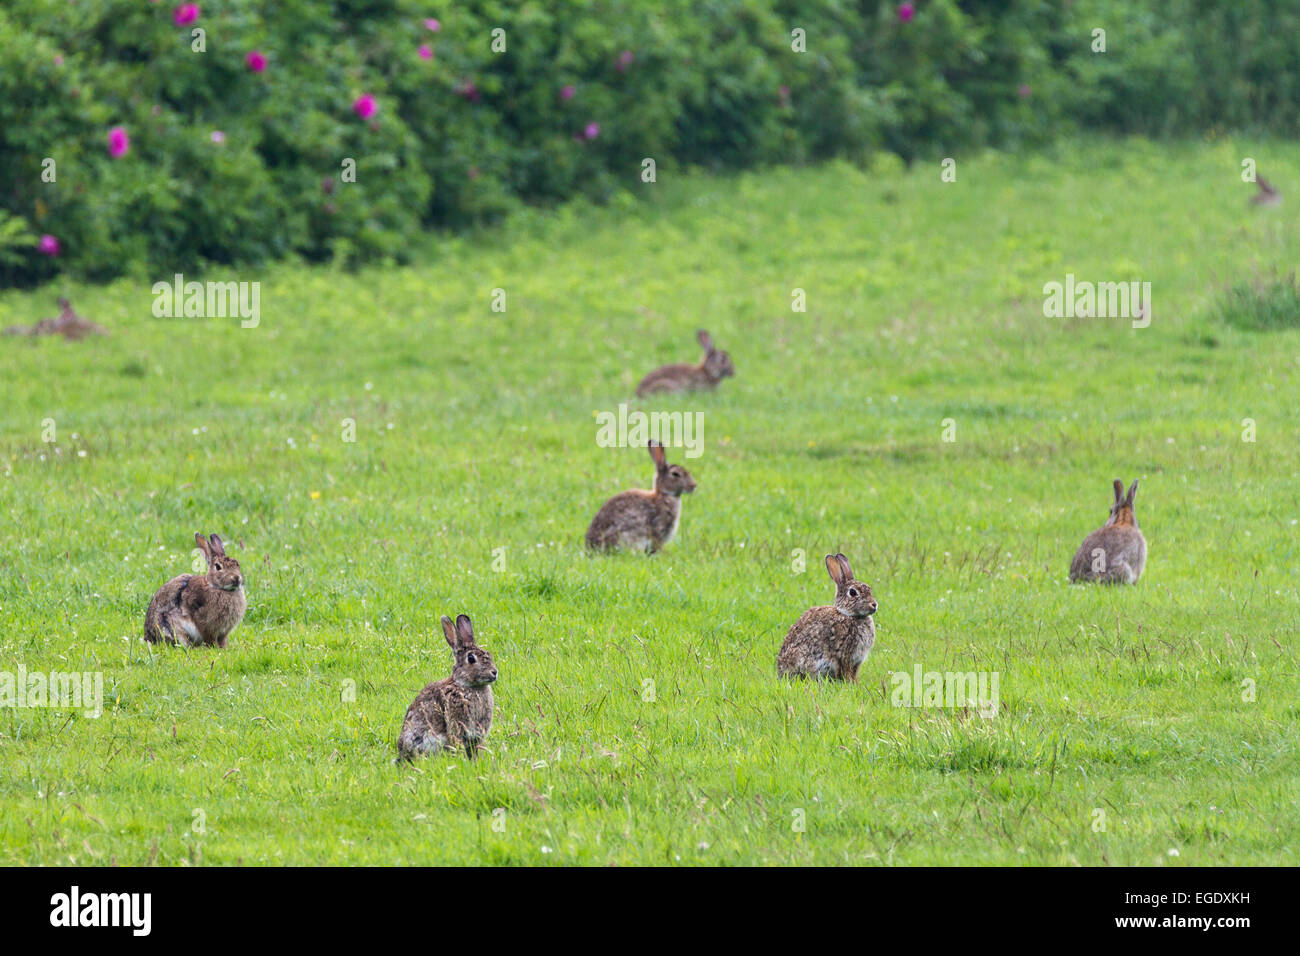 Rabbits on a meadow, Oryctolagus cuniculus, Norderney Island, Lower Saxony, Germany Stock Photo